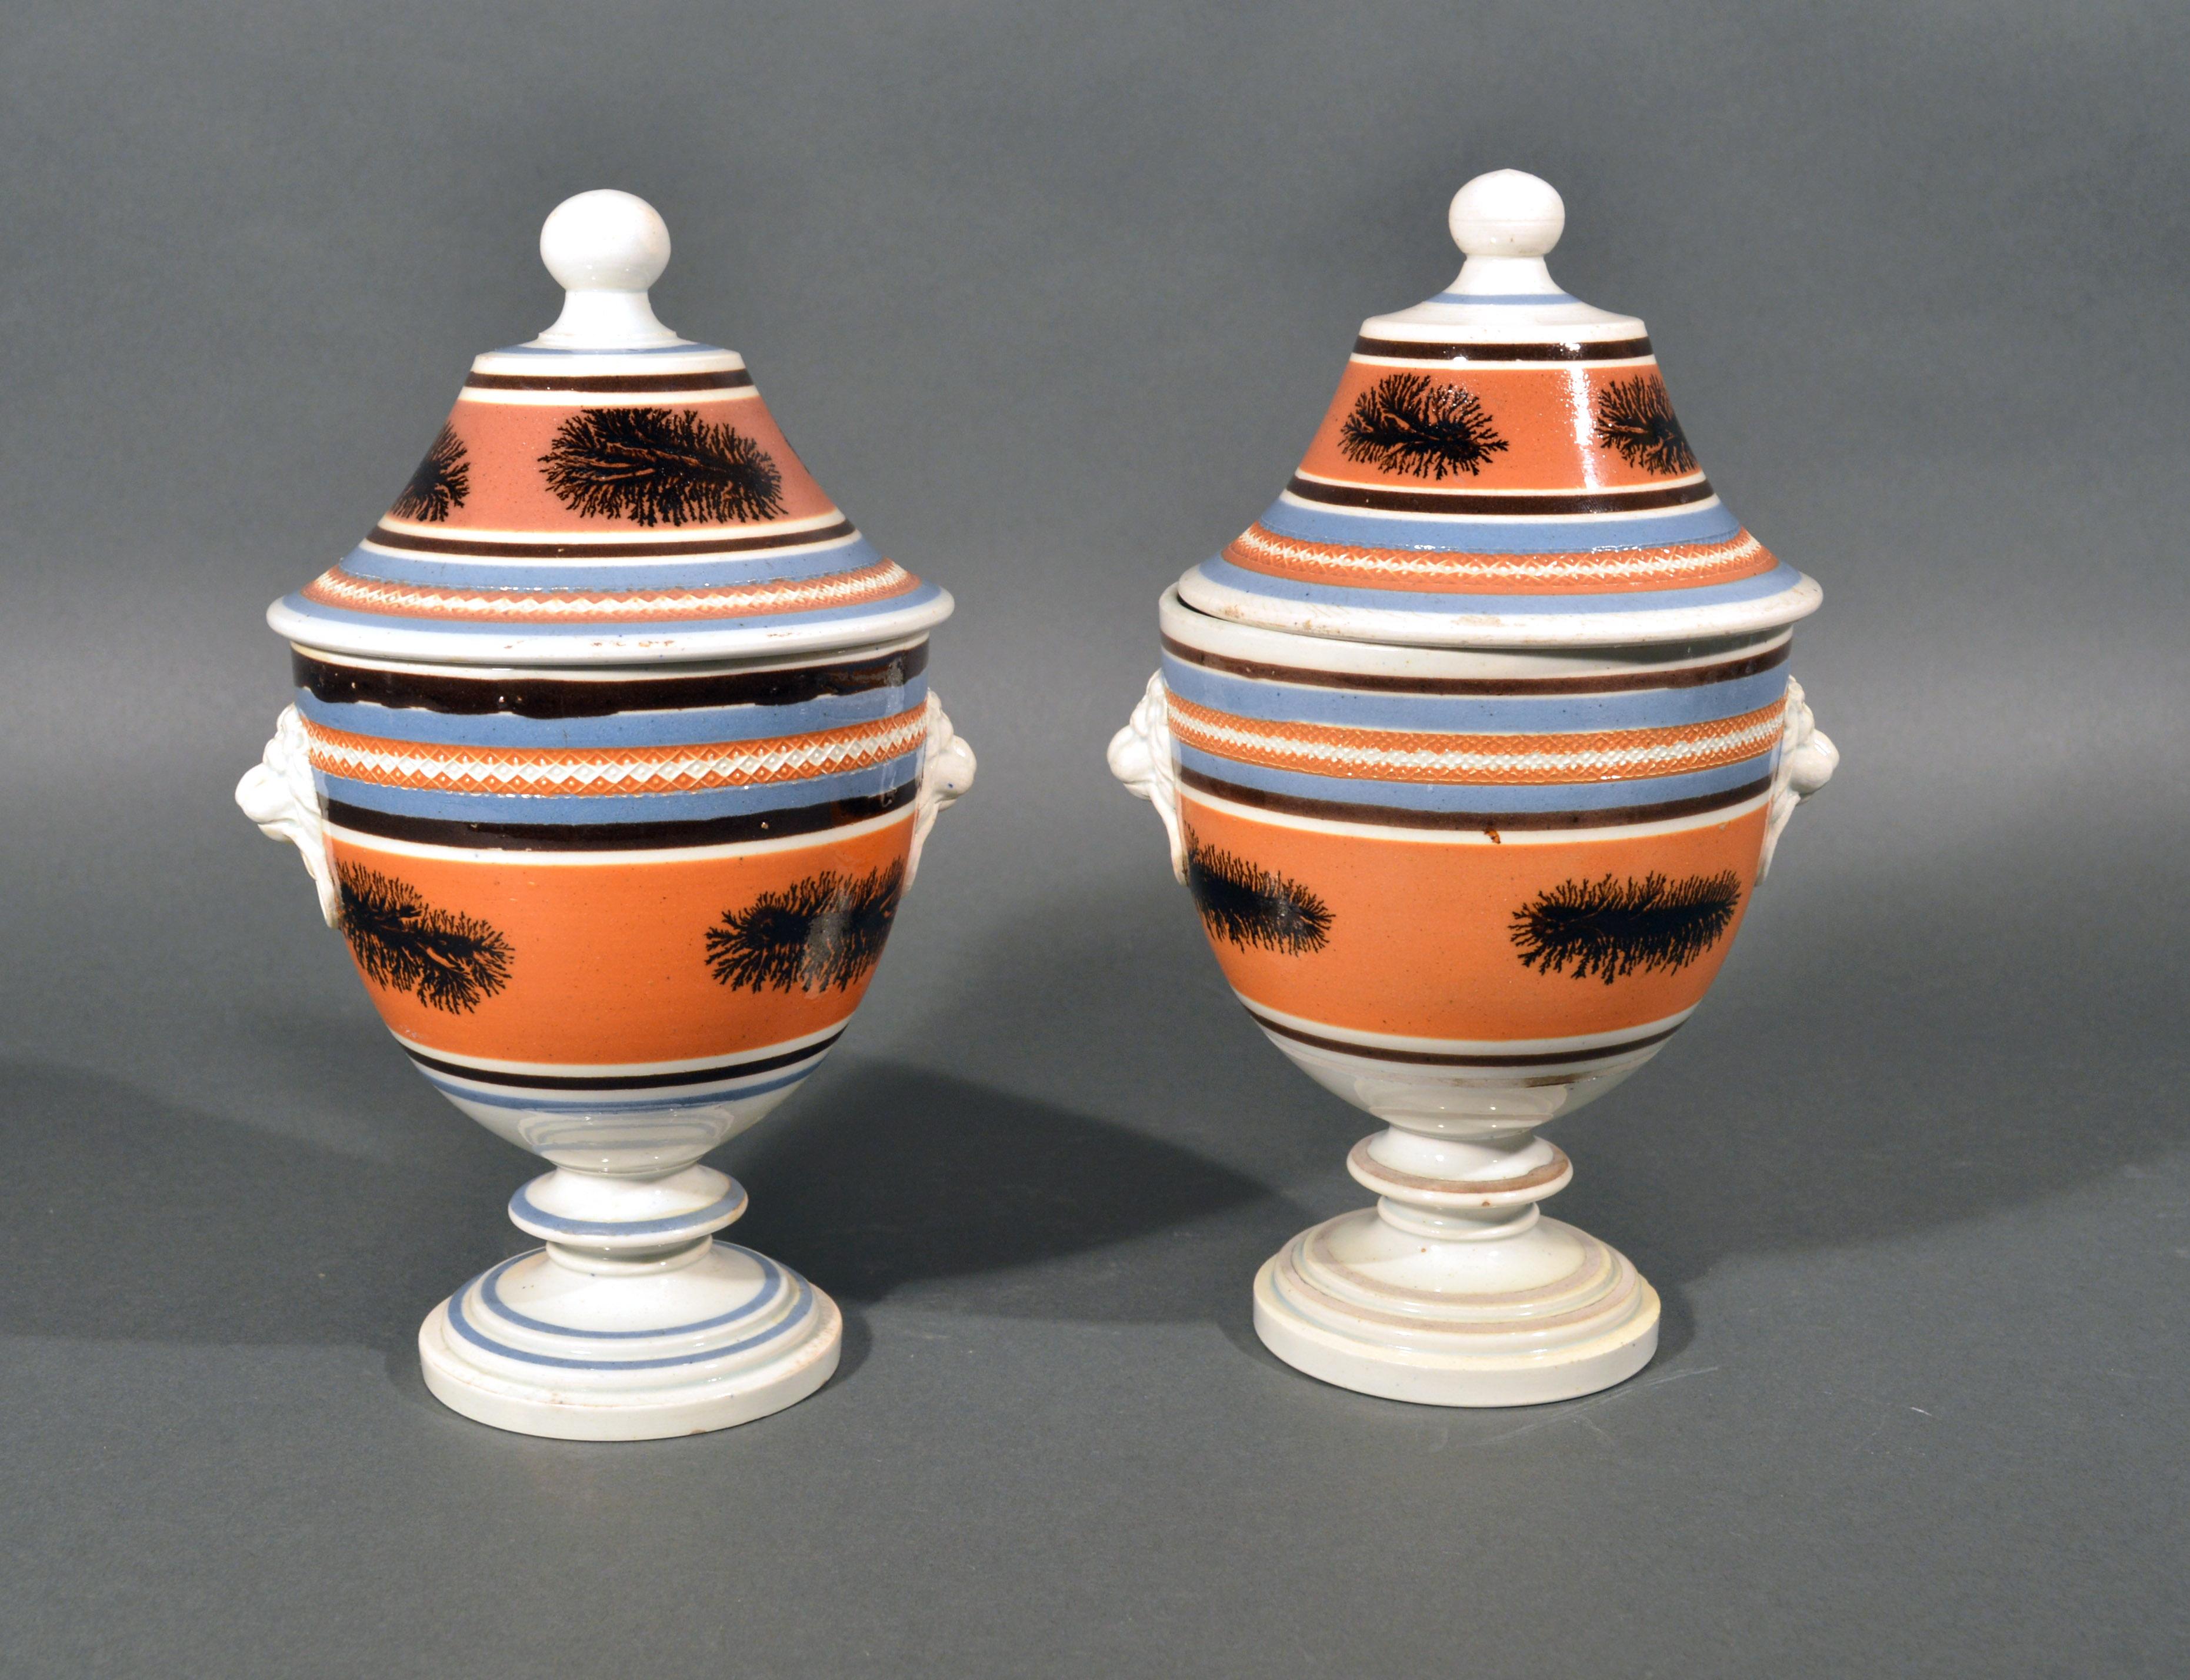 19th Century Mocha Pottery Covered Urns with Lion-Head Handles, circa 1825